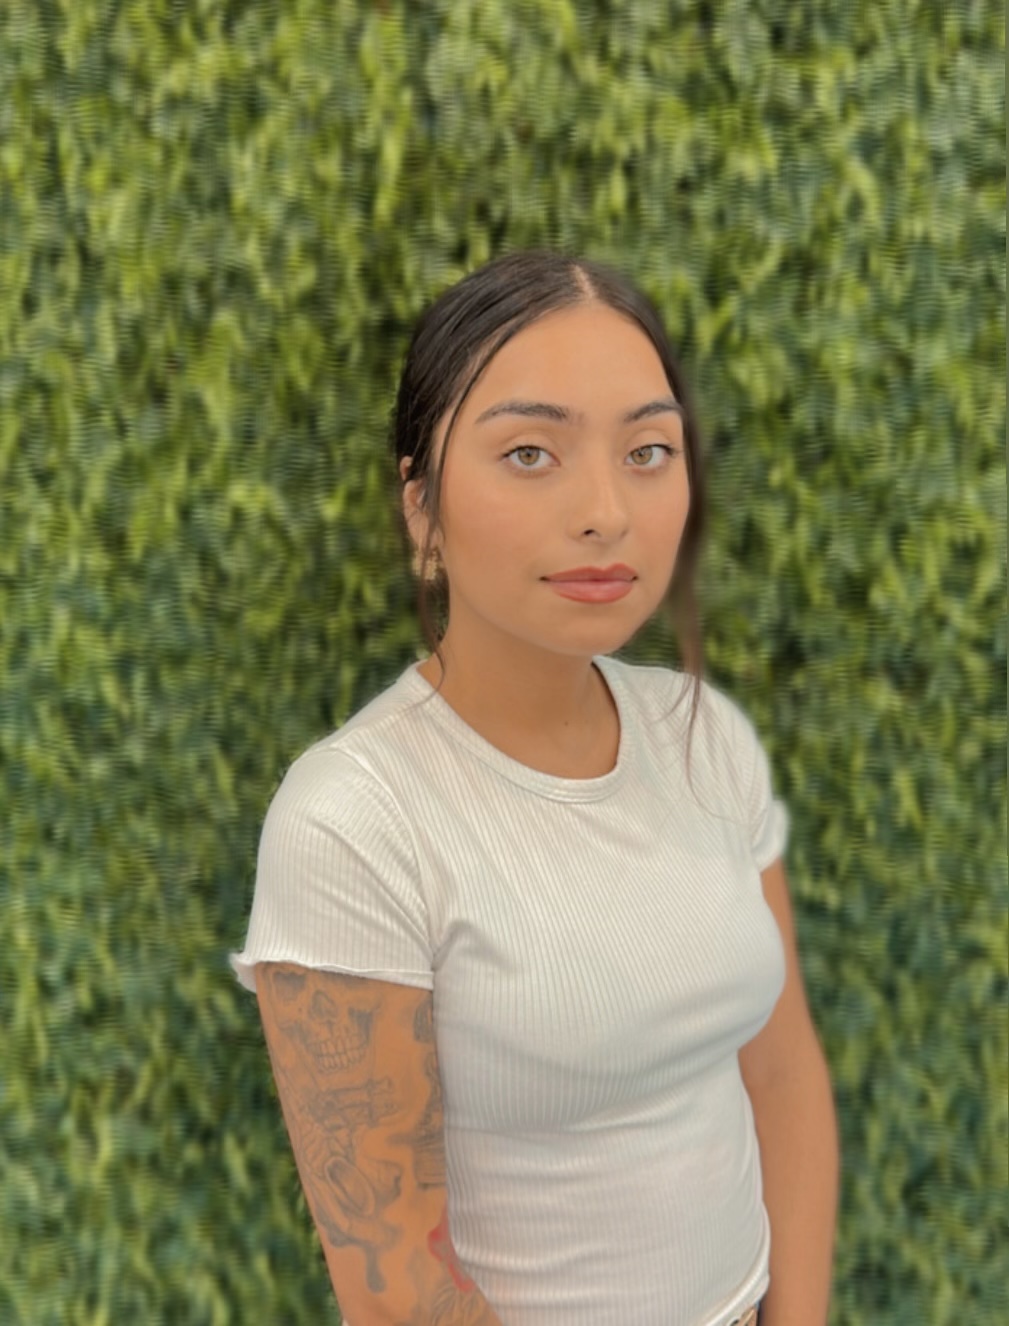 A woman with long dark hair and a tattoo on her left arm stands against a leafy green background, wearing a white ribbed short-sleeve shirt that perfectly complements the serene atmosphere of Josephine's Day Spa.